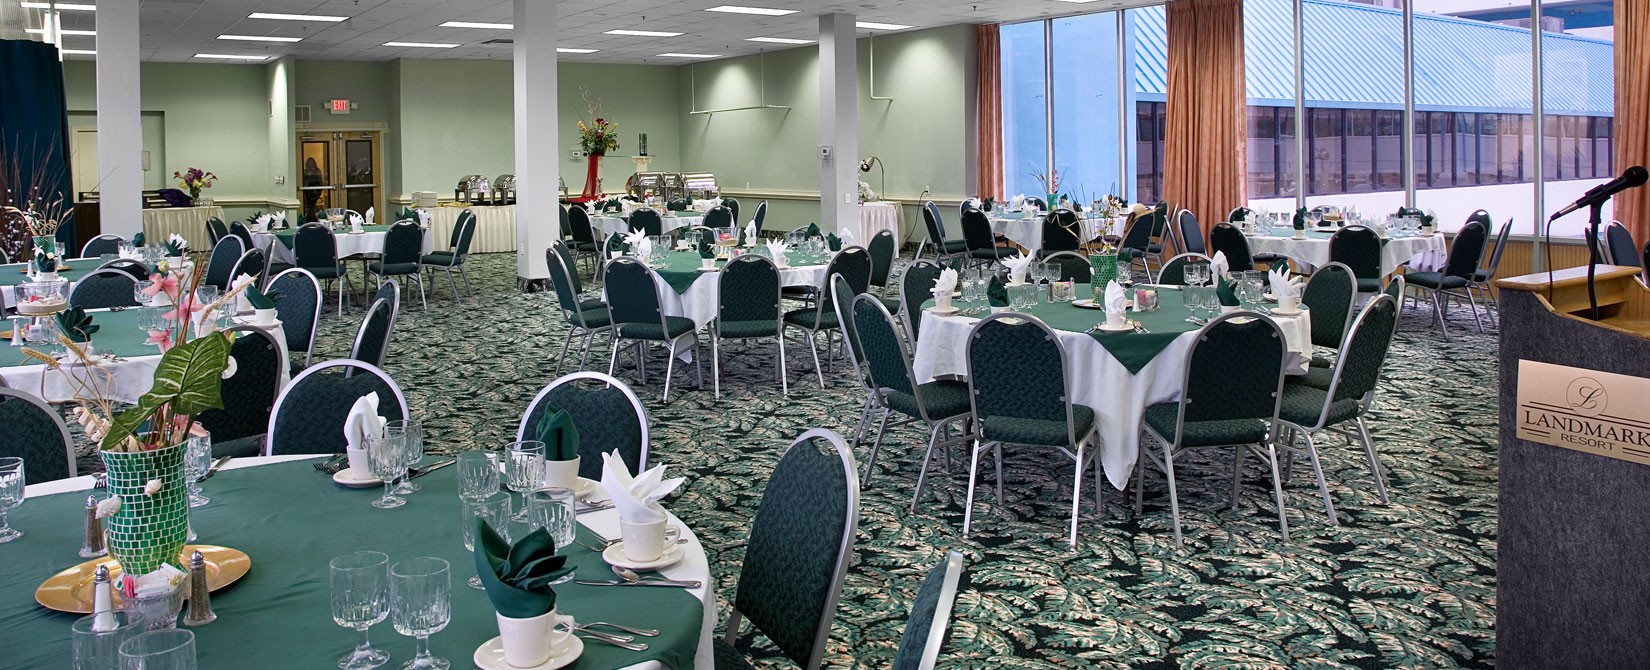 Banquet, meeting or conference room at Landmark Resort with dining settings